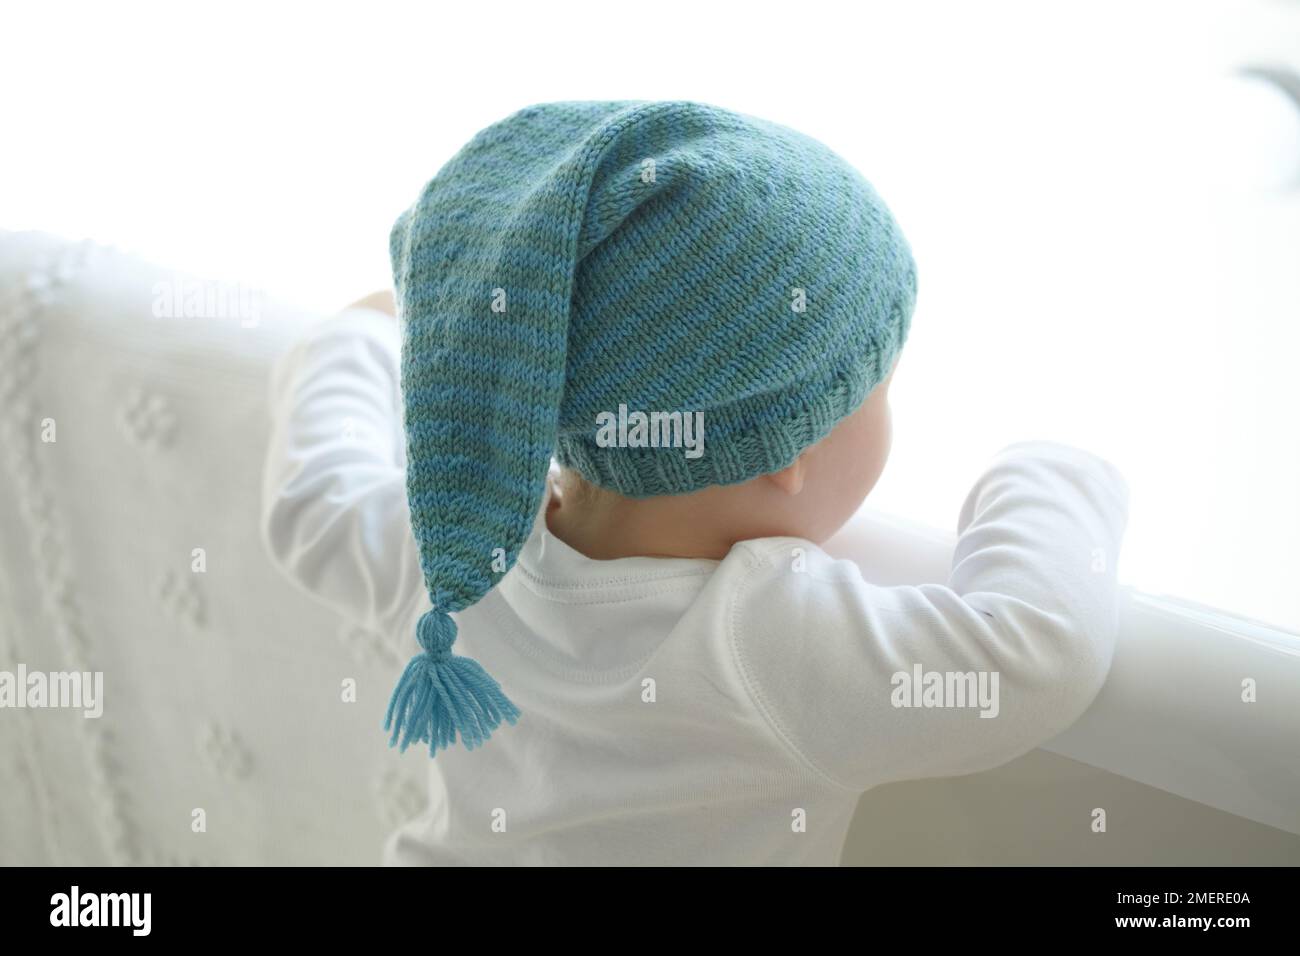 Boy wearing long knitted hat, 17 months Stock Photo